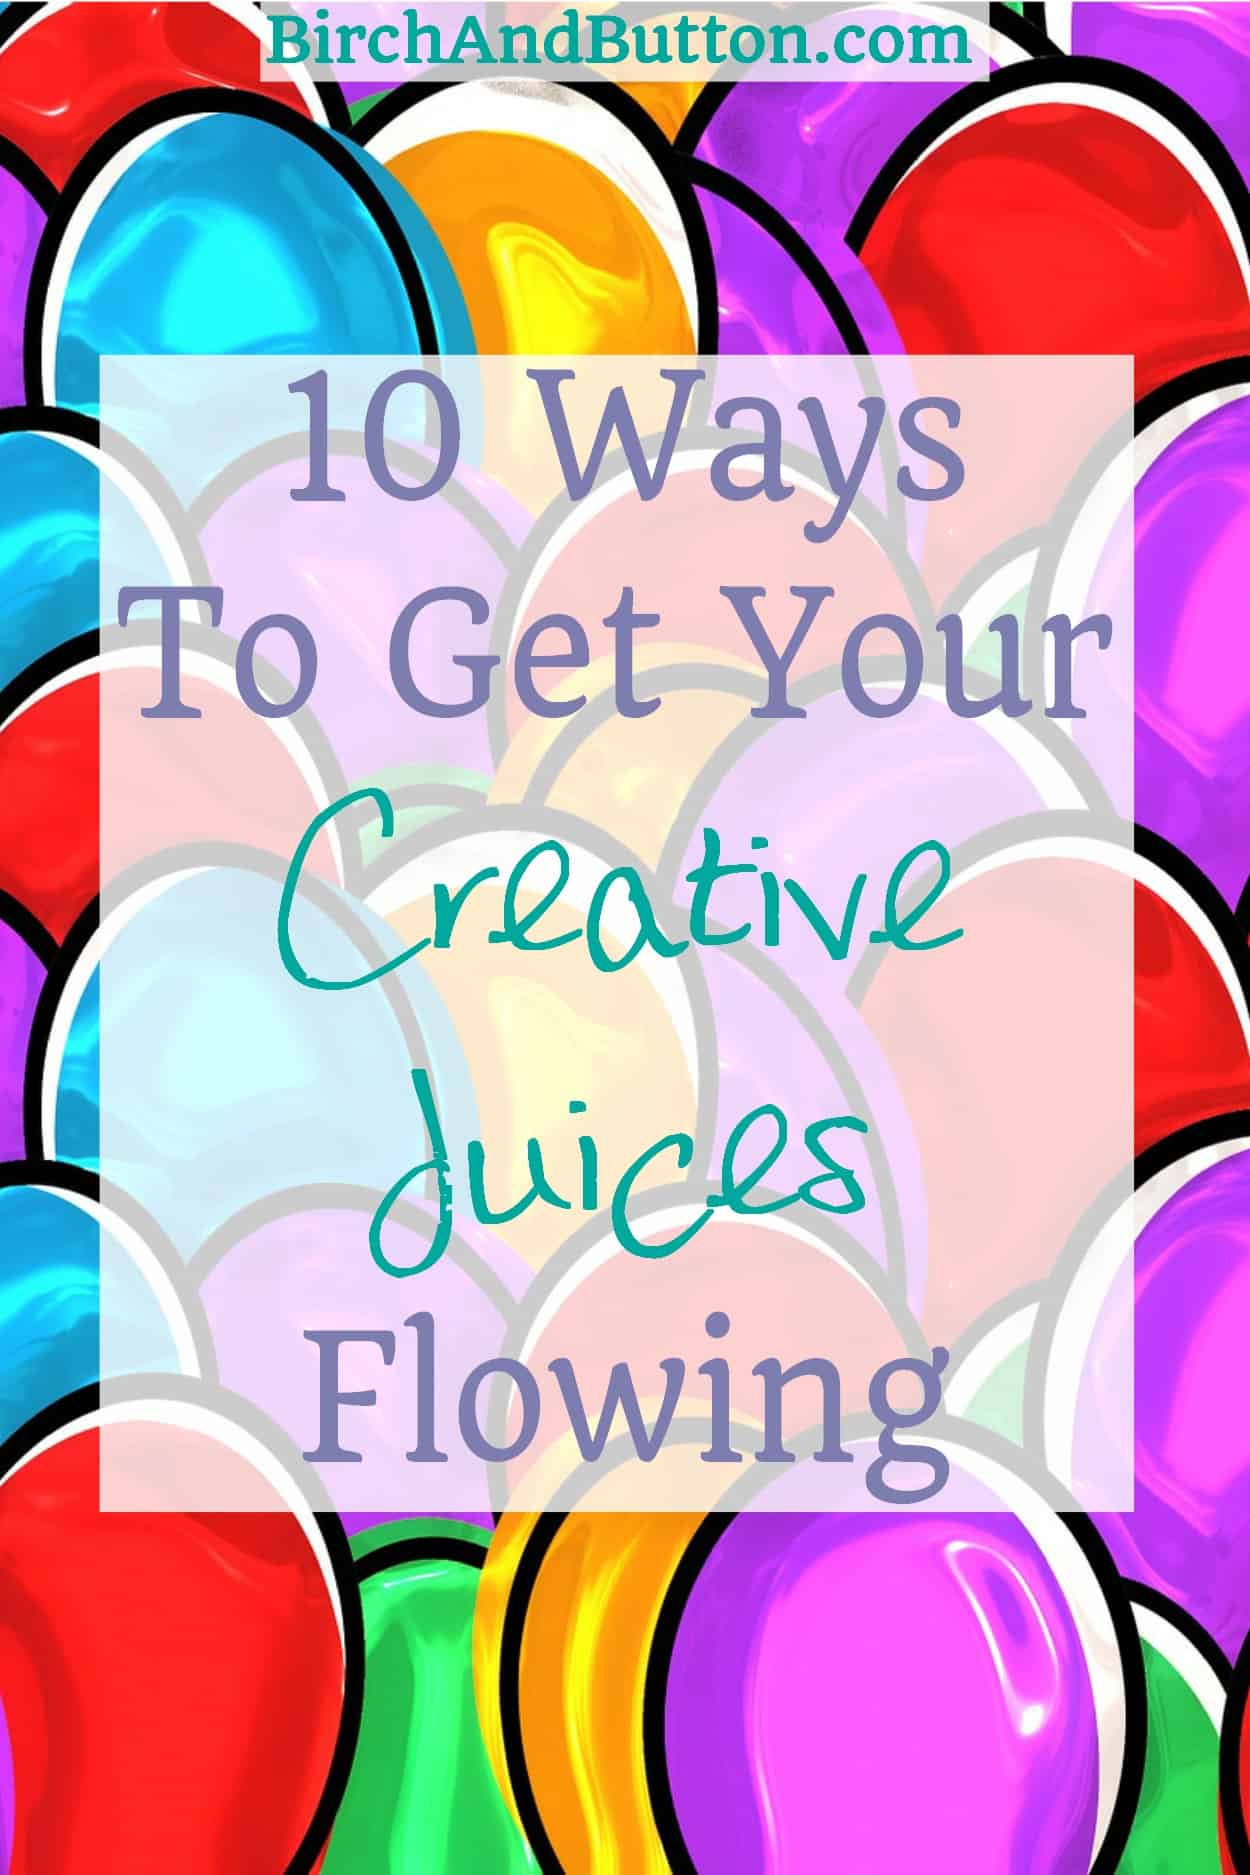 how to get creative writing juices flowing